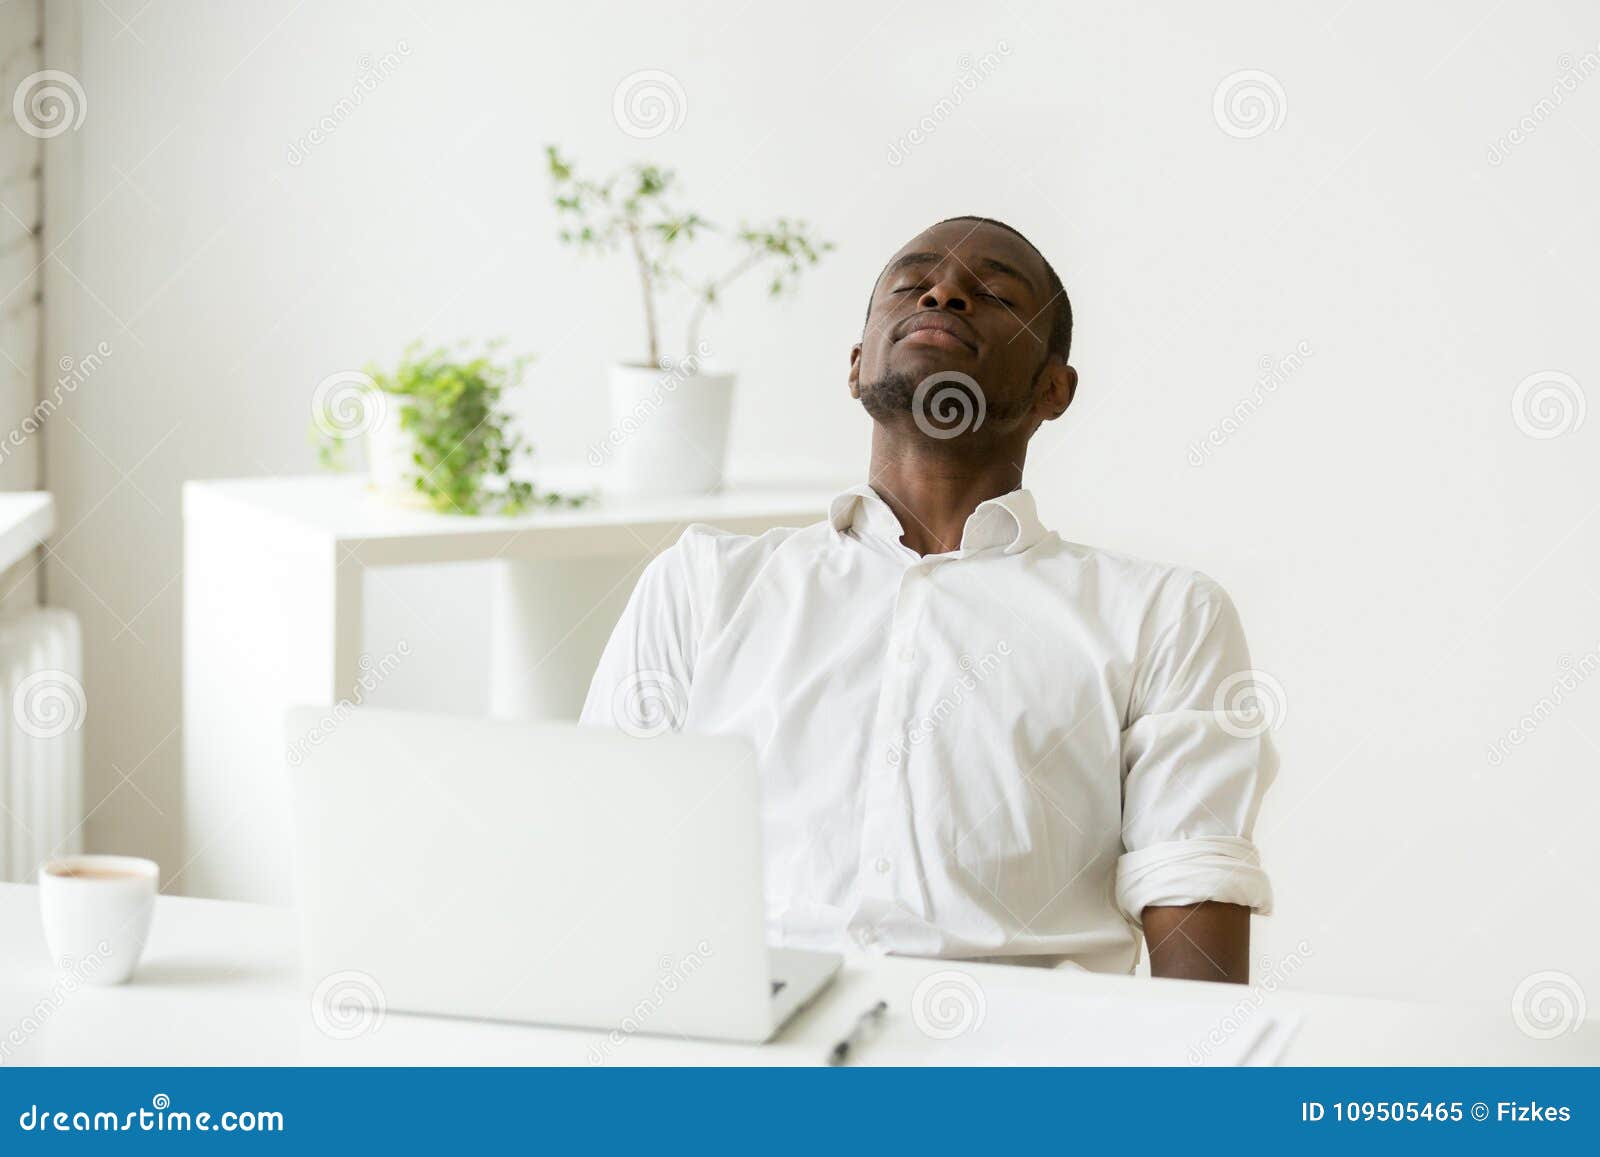 black employee taking rest doing exercise for relaxation at work